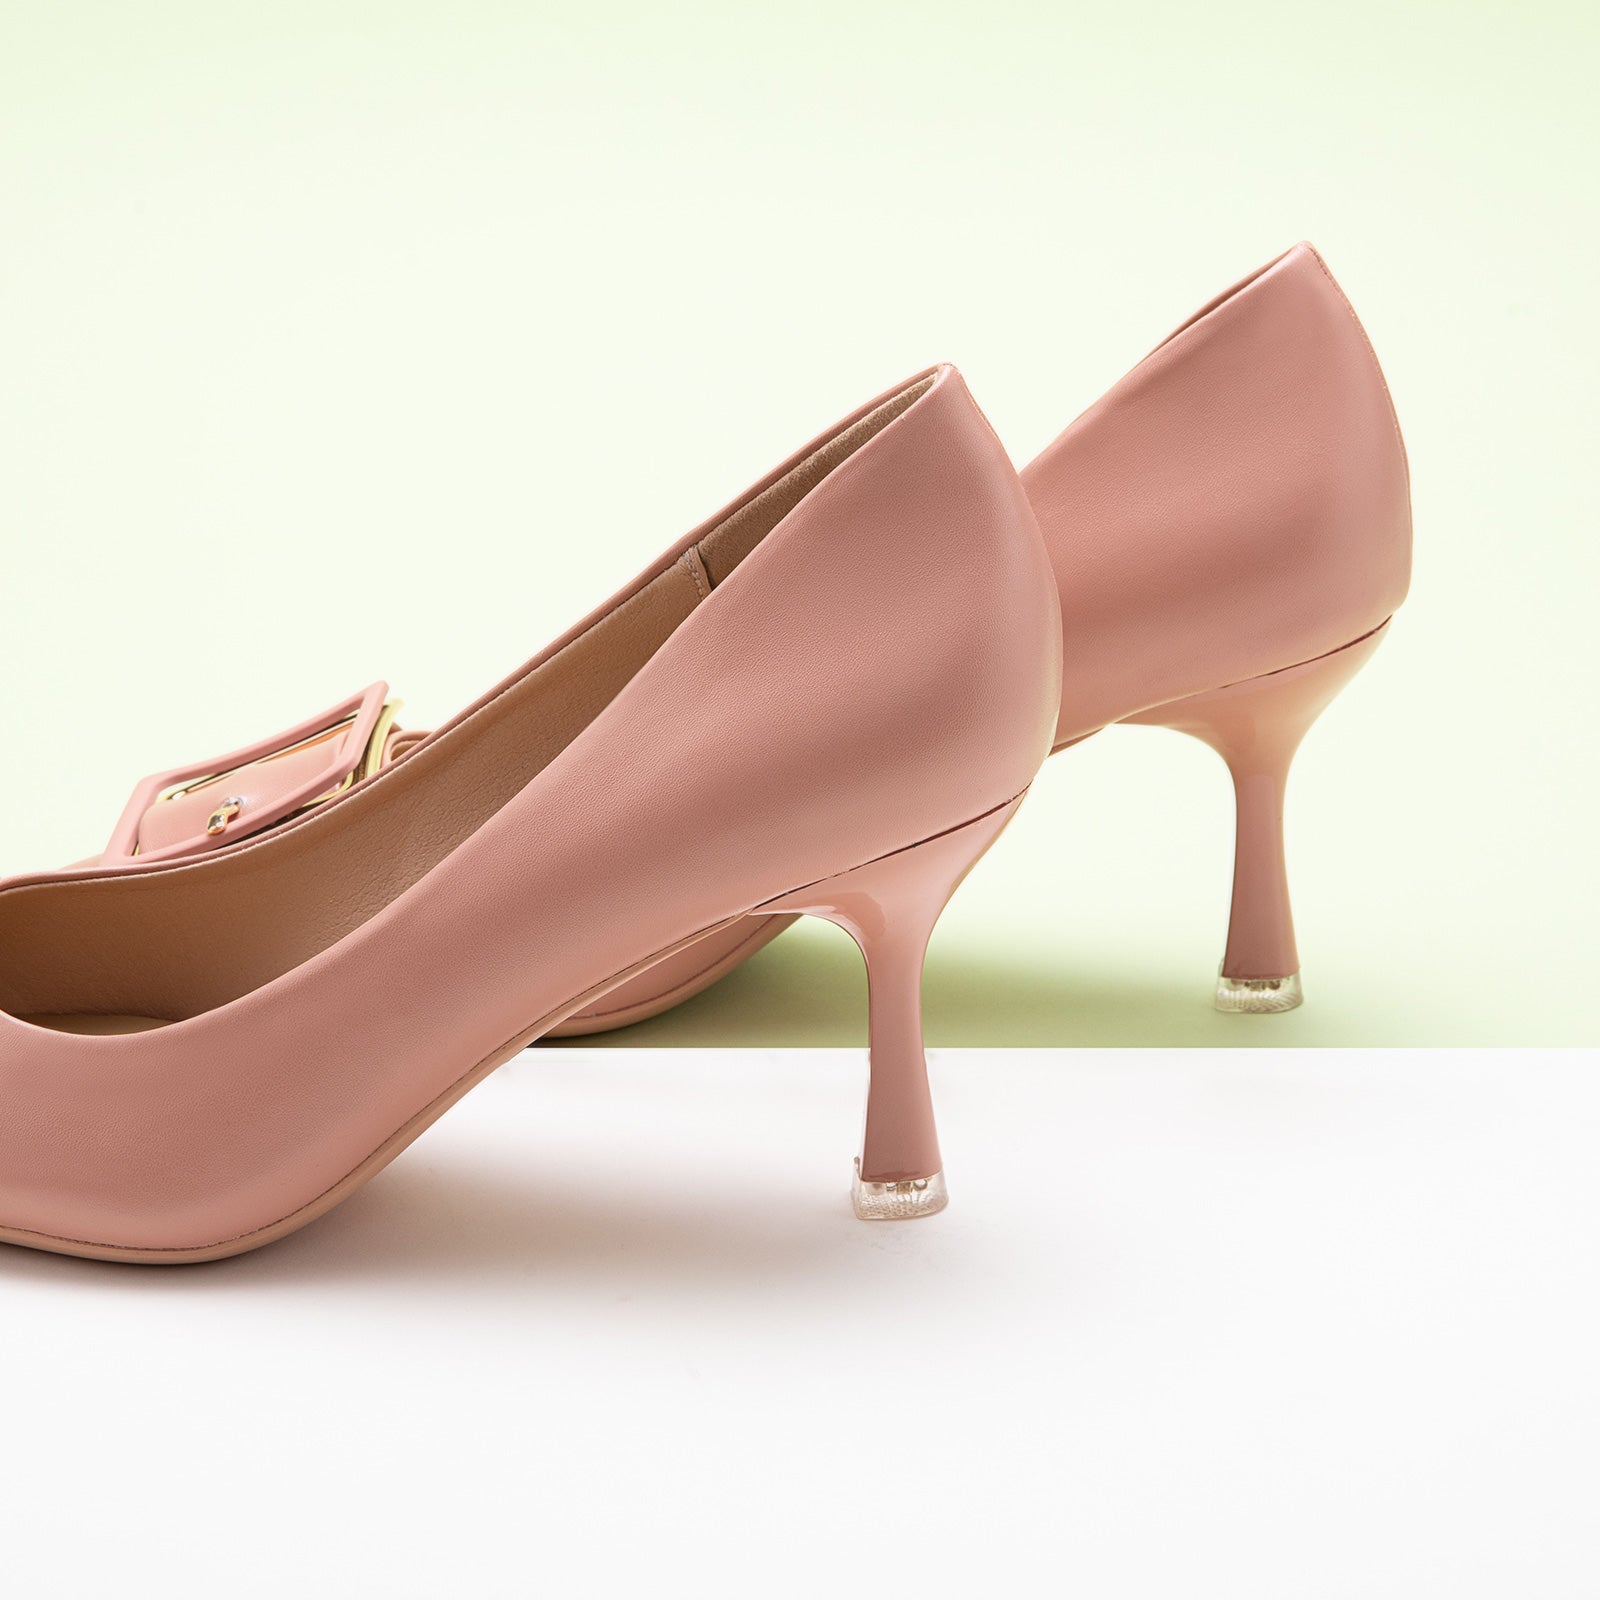 Pink Elegant Pumps with a square buckle, a sweet and versatile addition to your footwear collection